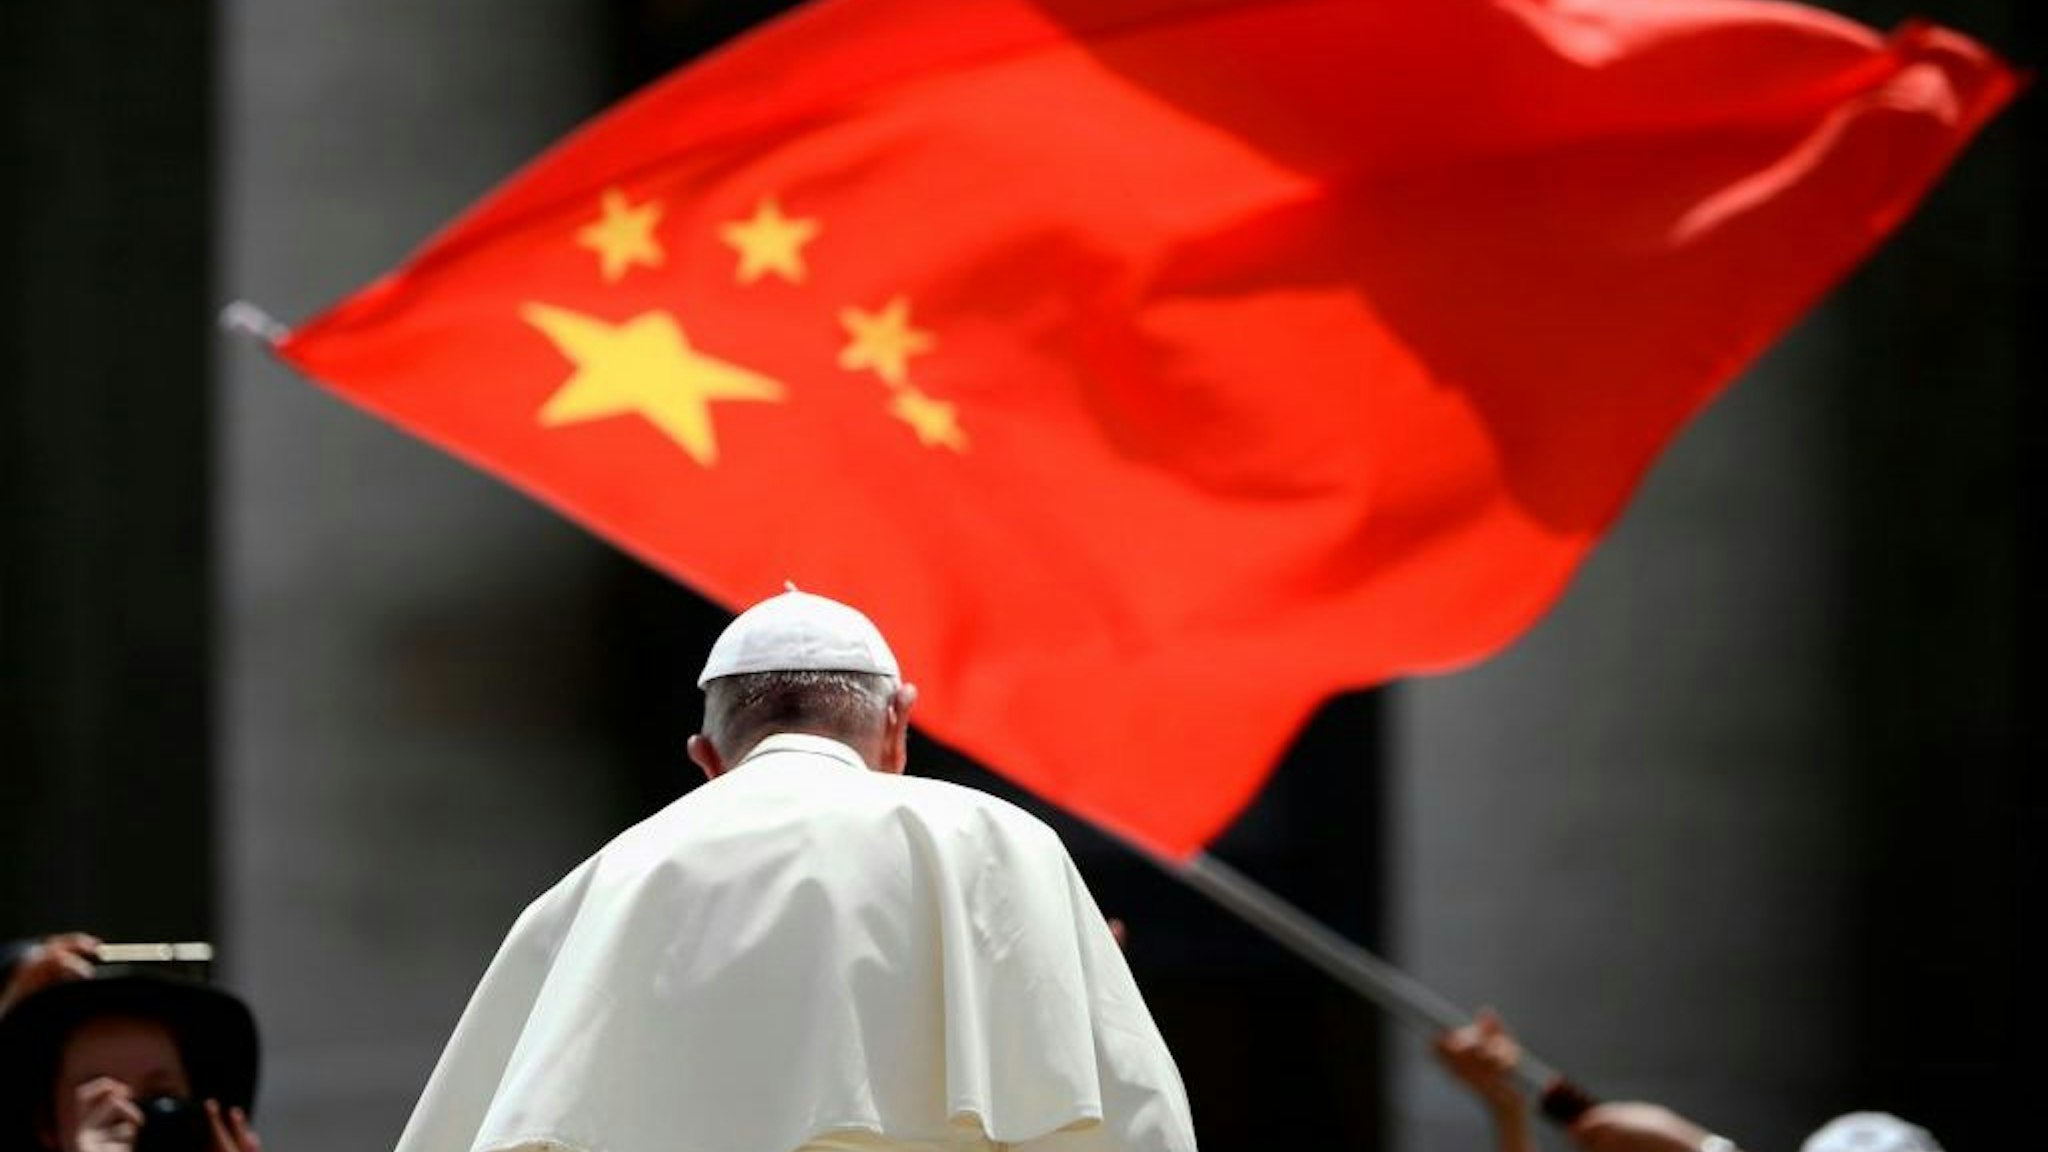 A worshipers waves the flag of China as Pope Francis leaves following the weekly general audience on June 12, 2019 at St. Peter's square in the Vatican. (Photo by Filippo MONTEFORTE / AFP) (Photo credit should read FILIPPO MONTEFORTE/AFP via Getty Images)